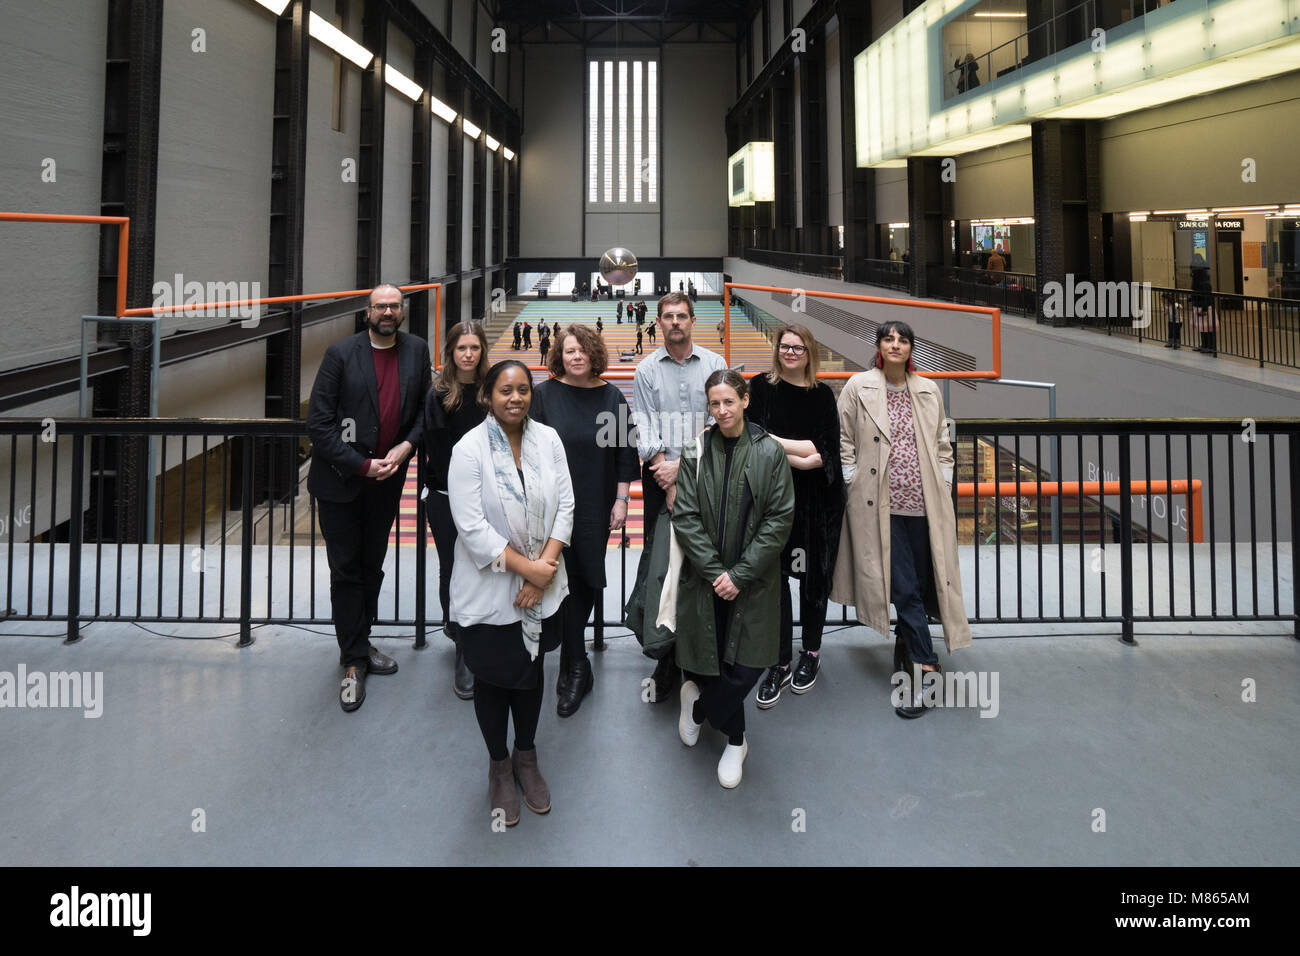 London, UK. 15th March, 2018. Artists (left to right), Ari Benjamin Meyers, Holly Hendry, Mae-ling Lokko, Sally Tallant (Director, Liverpool Biennial), Paul Ellman, Janice Kerbal, Kitty Scott (co-curator, Liverpool Biennial and Rehang Zaman posing for photos in the Turbine Hall of the Tate Modern in London for the launch of the programme for the 10th Liverpool Biennial, opening on 14 July 2018 in venues across Liverpool, marking its 20th anniversary. Credit: Roger Garfield/Alamy Live News Stock Photo